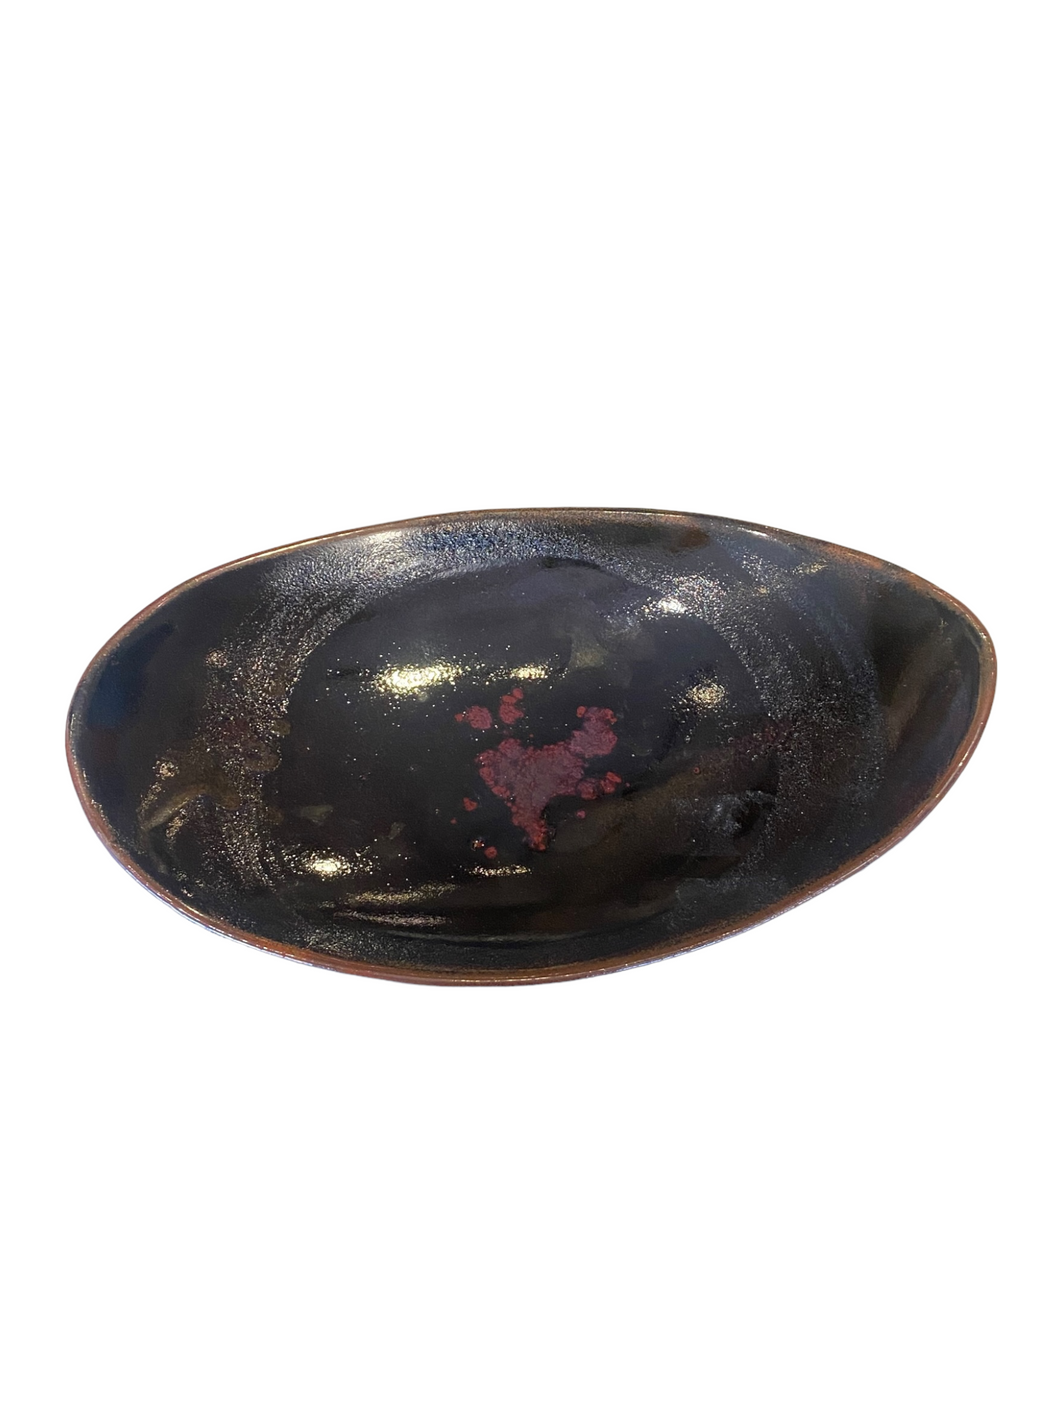 Glazed Ovular Dish with Deep Red Accents